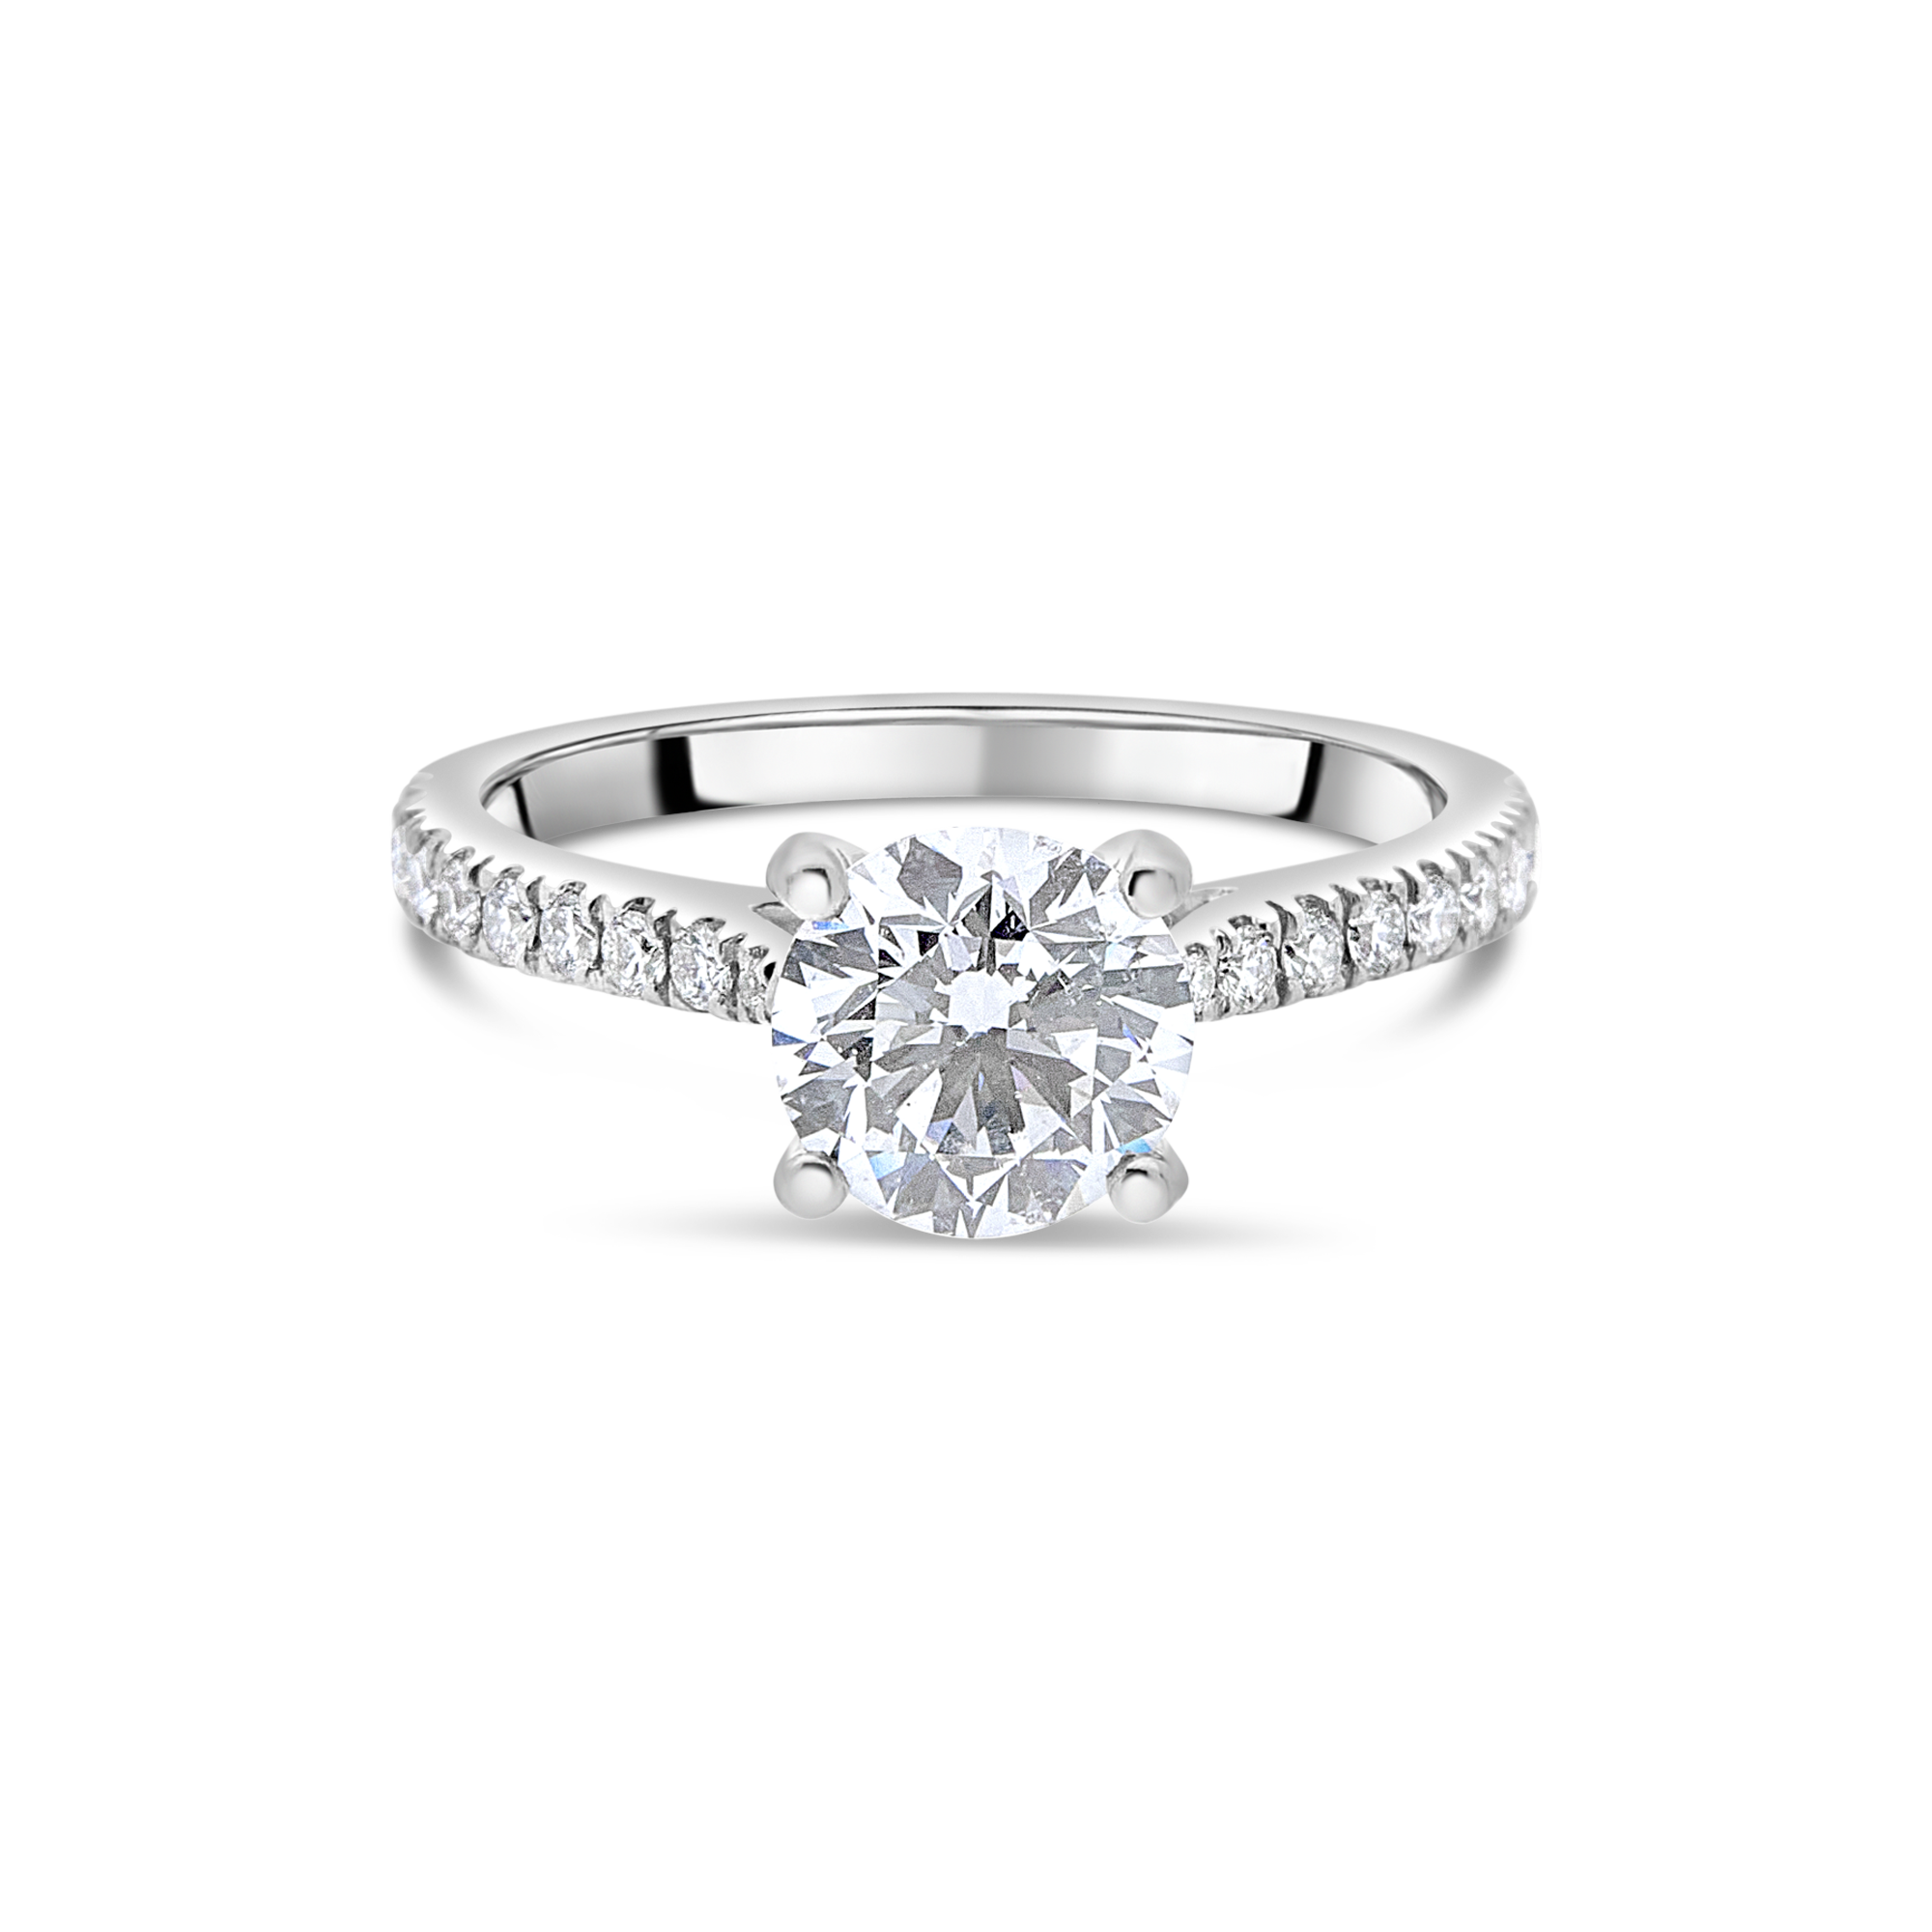 The "J'adore" with Round Brilliant and Pavé Diamond Band